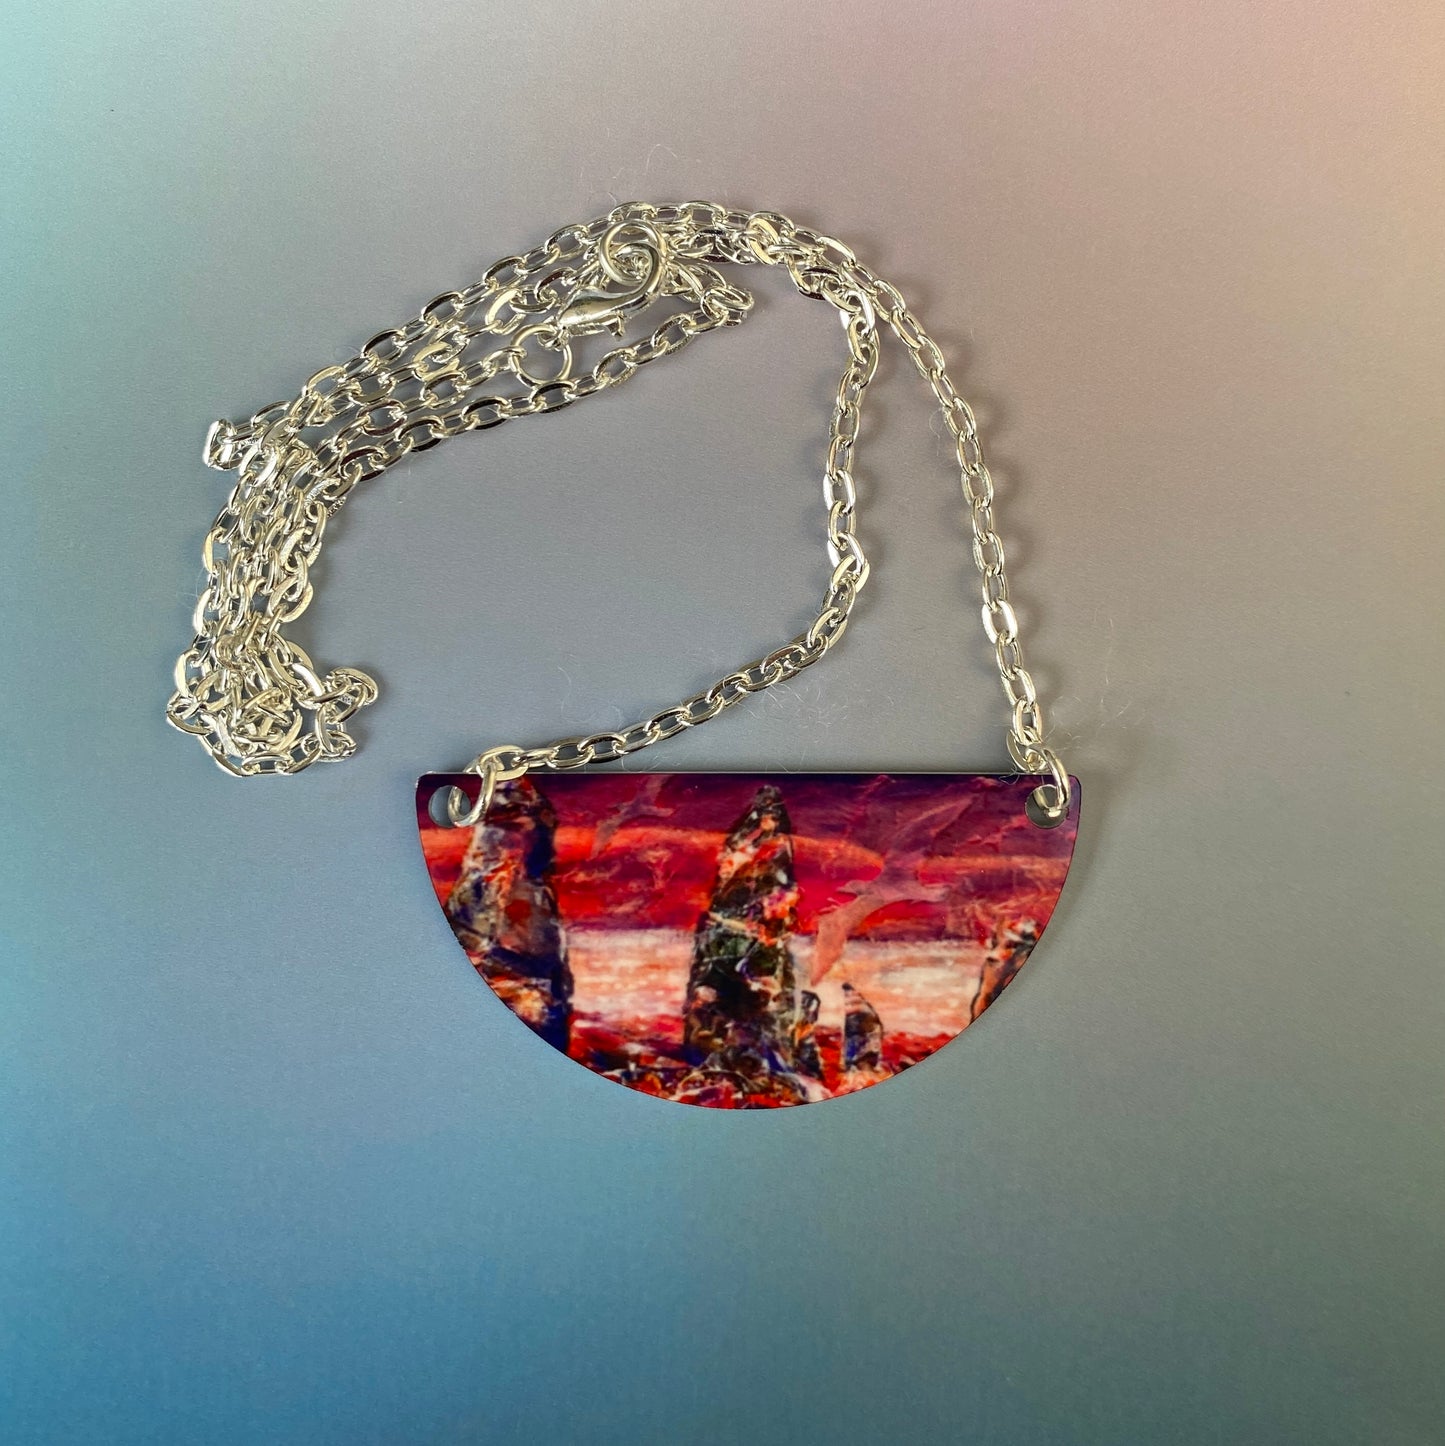 A pendant neckclace with design, A wild sunset at The Ring of Brodgar by Orkney artist Jane Glue, Scotland